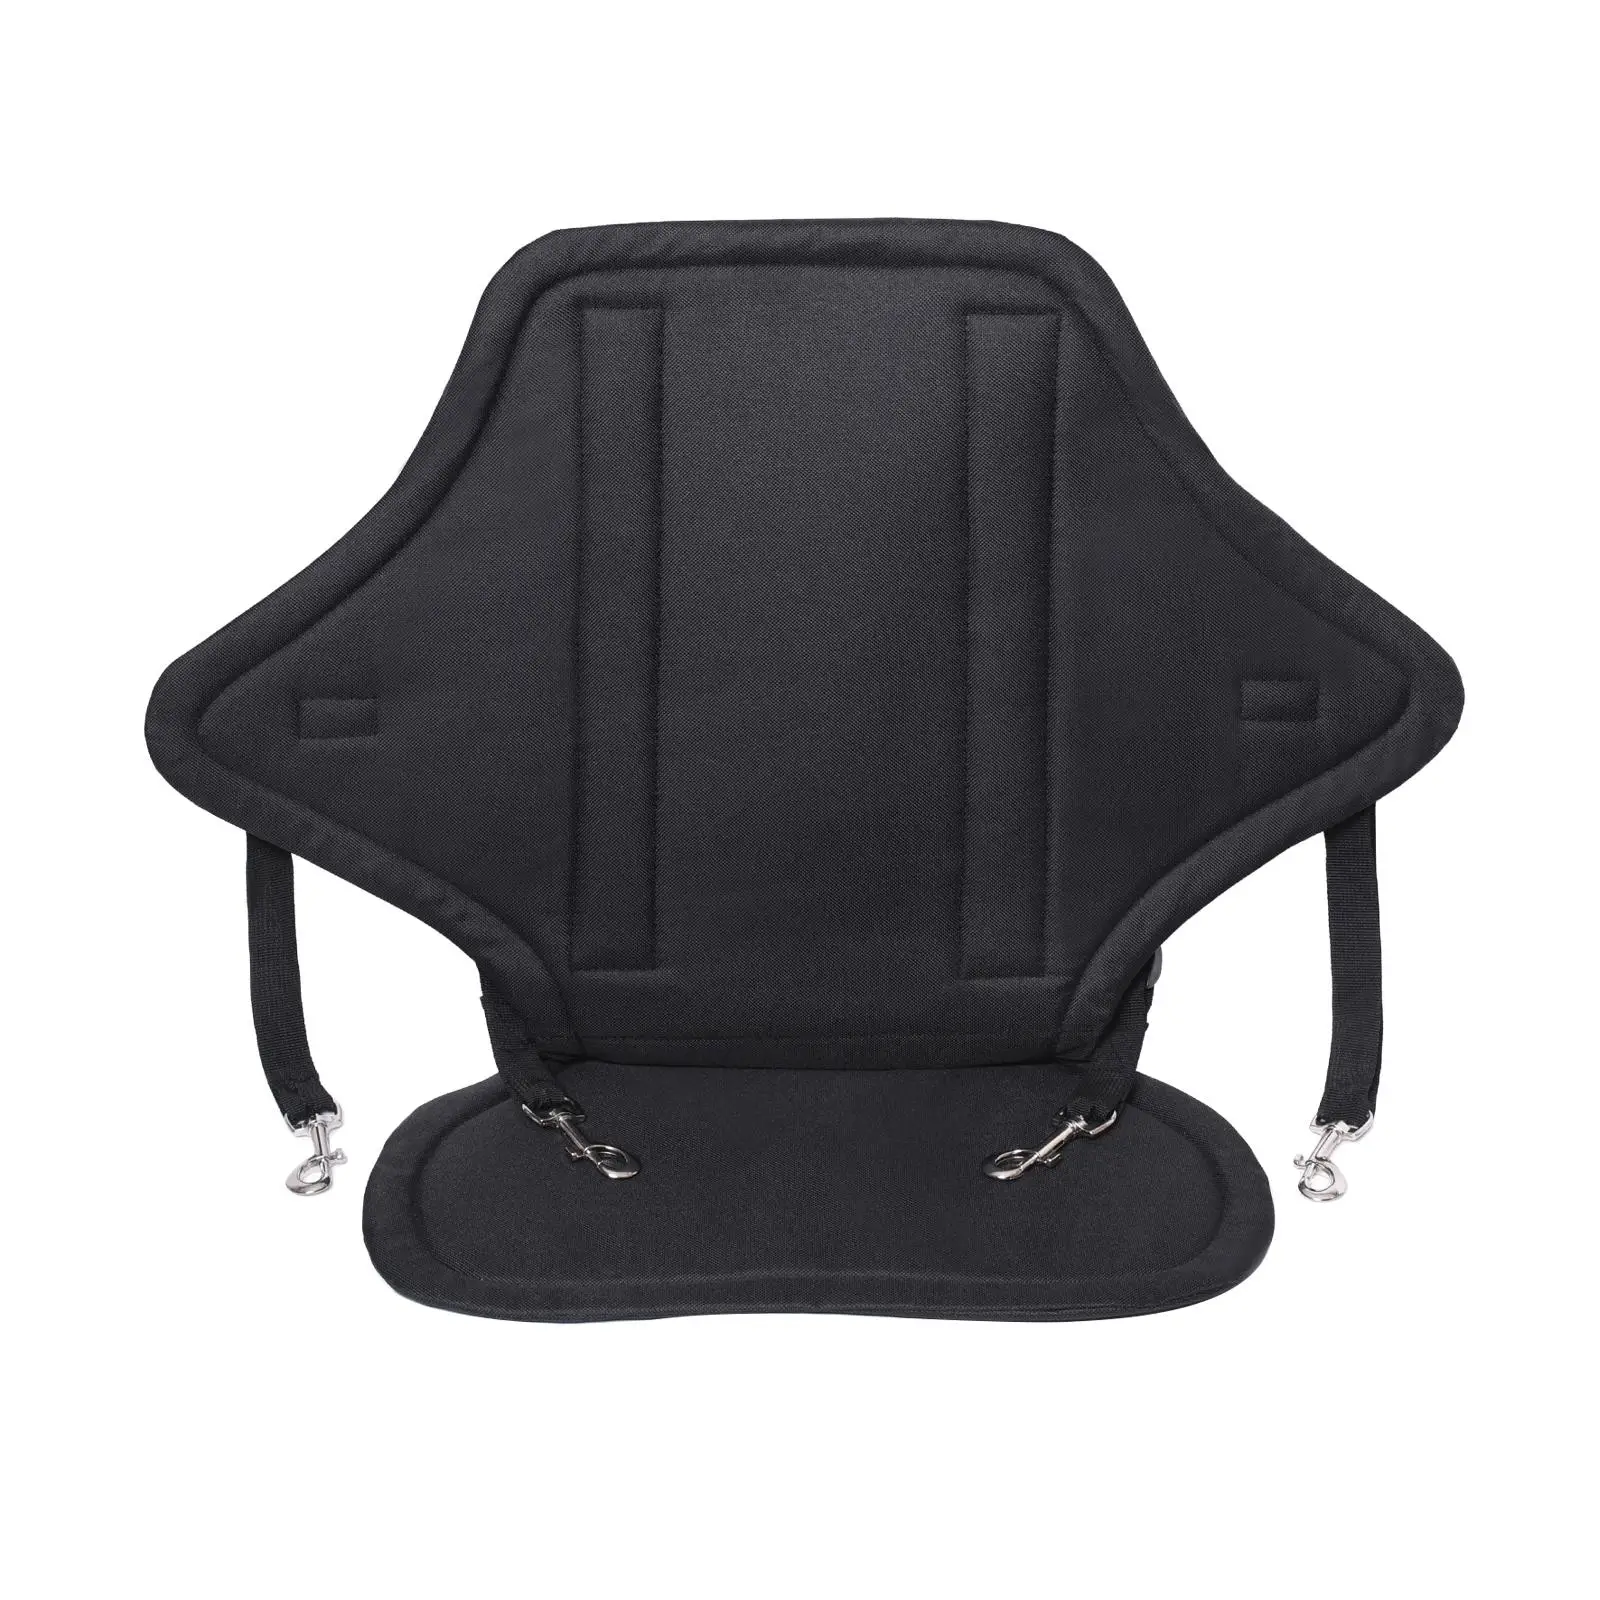 Detachable Kayak Seat Cushion Support Back Bleacher Chairs Black for Universal Sit Kids Adults Fishing